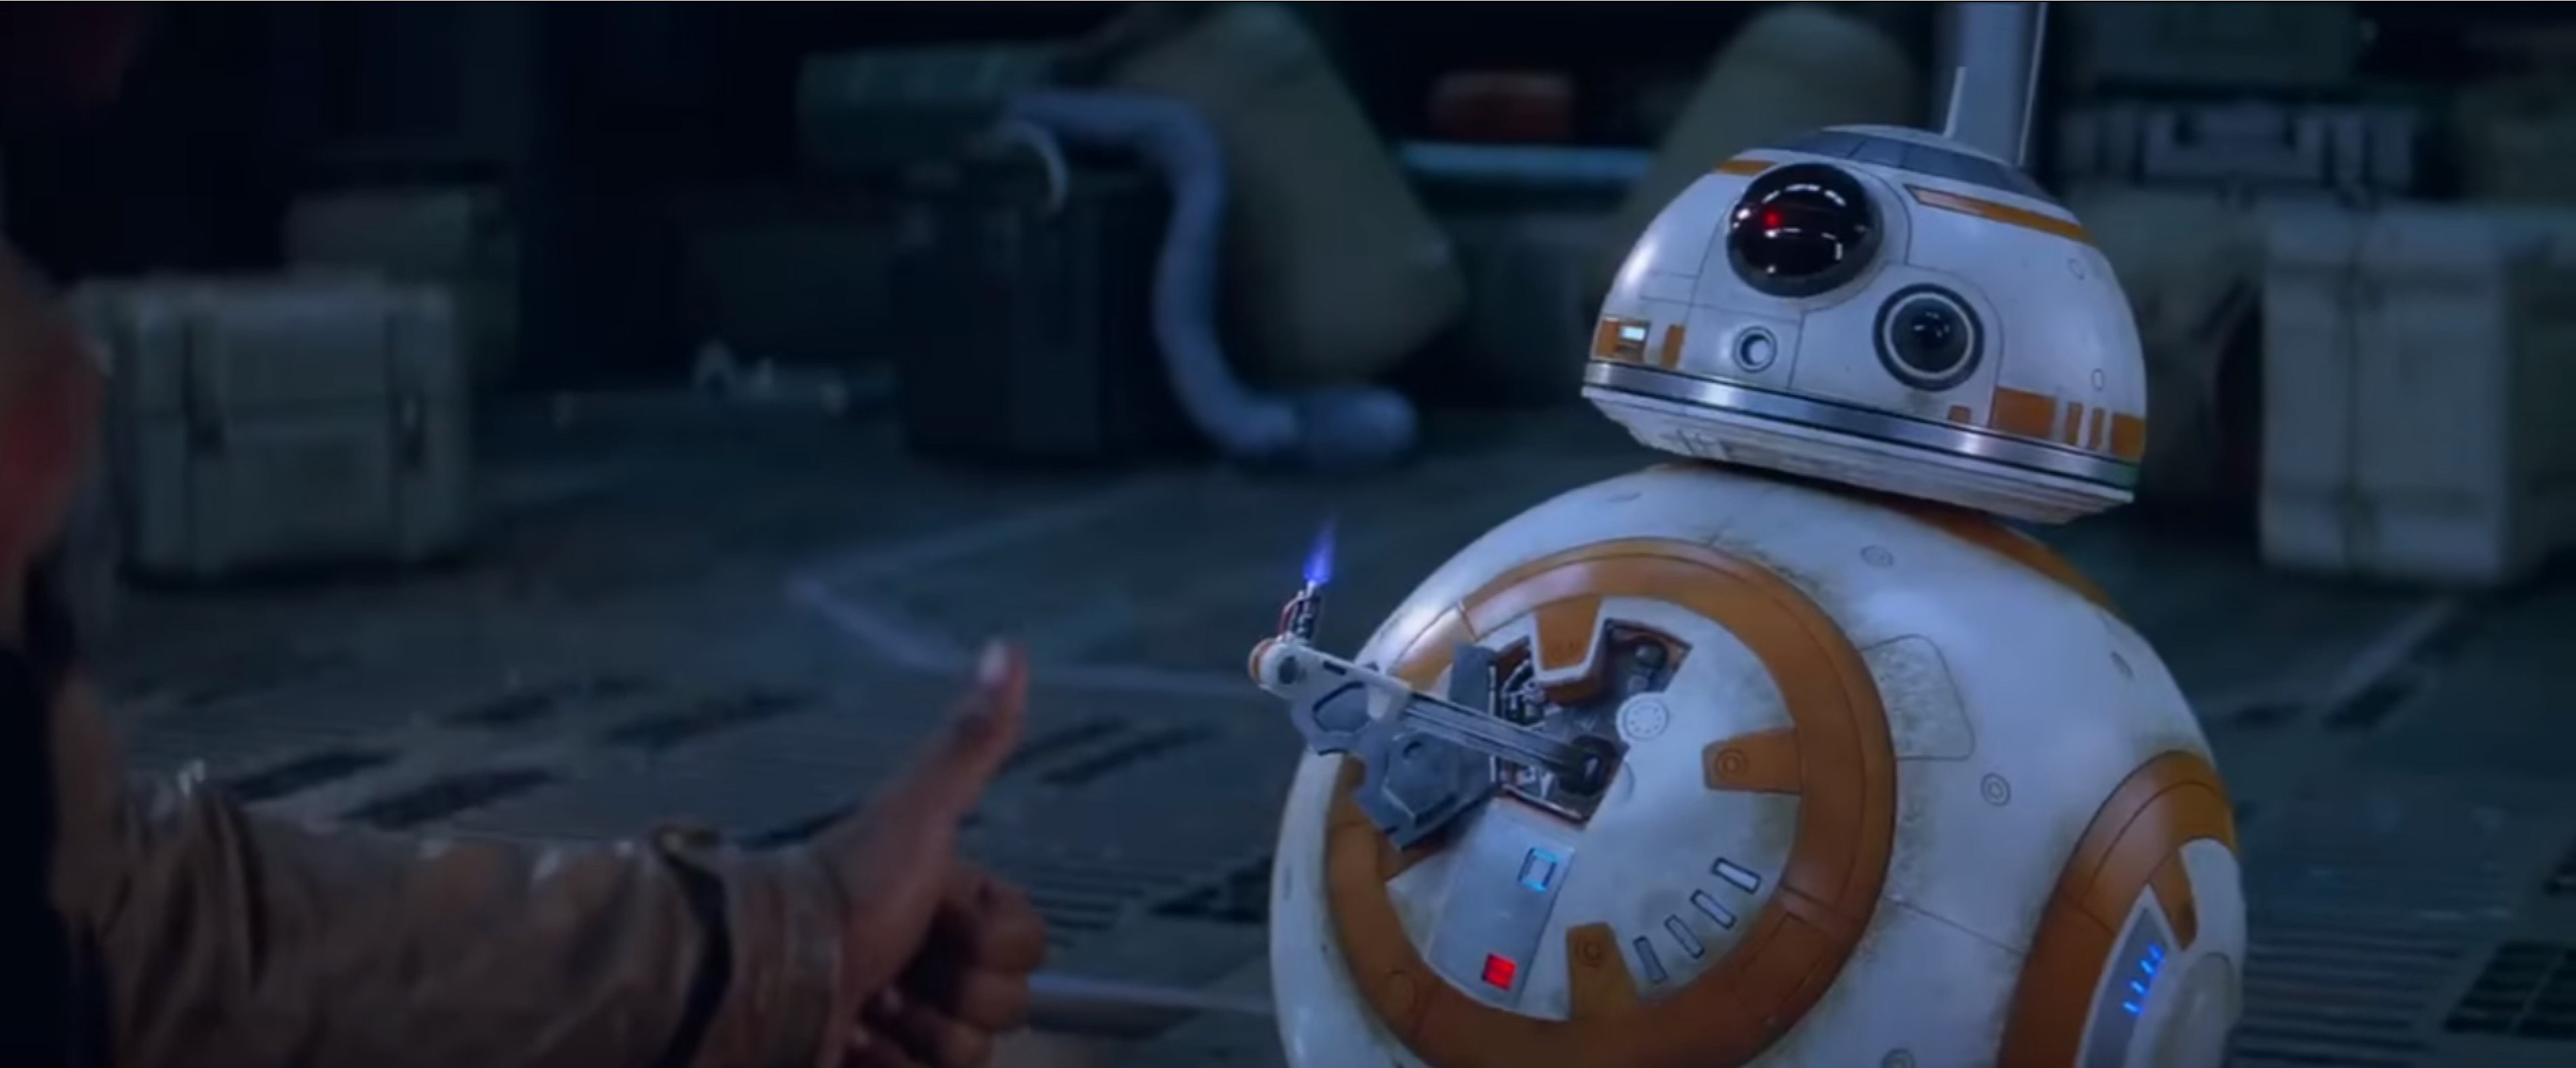 3816x1582 Force Awakens contributions - star wars: the force awakens bb8 thumbs up